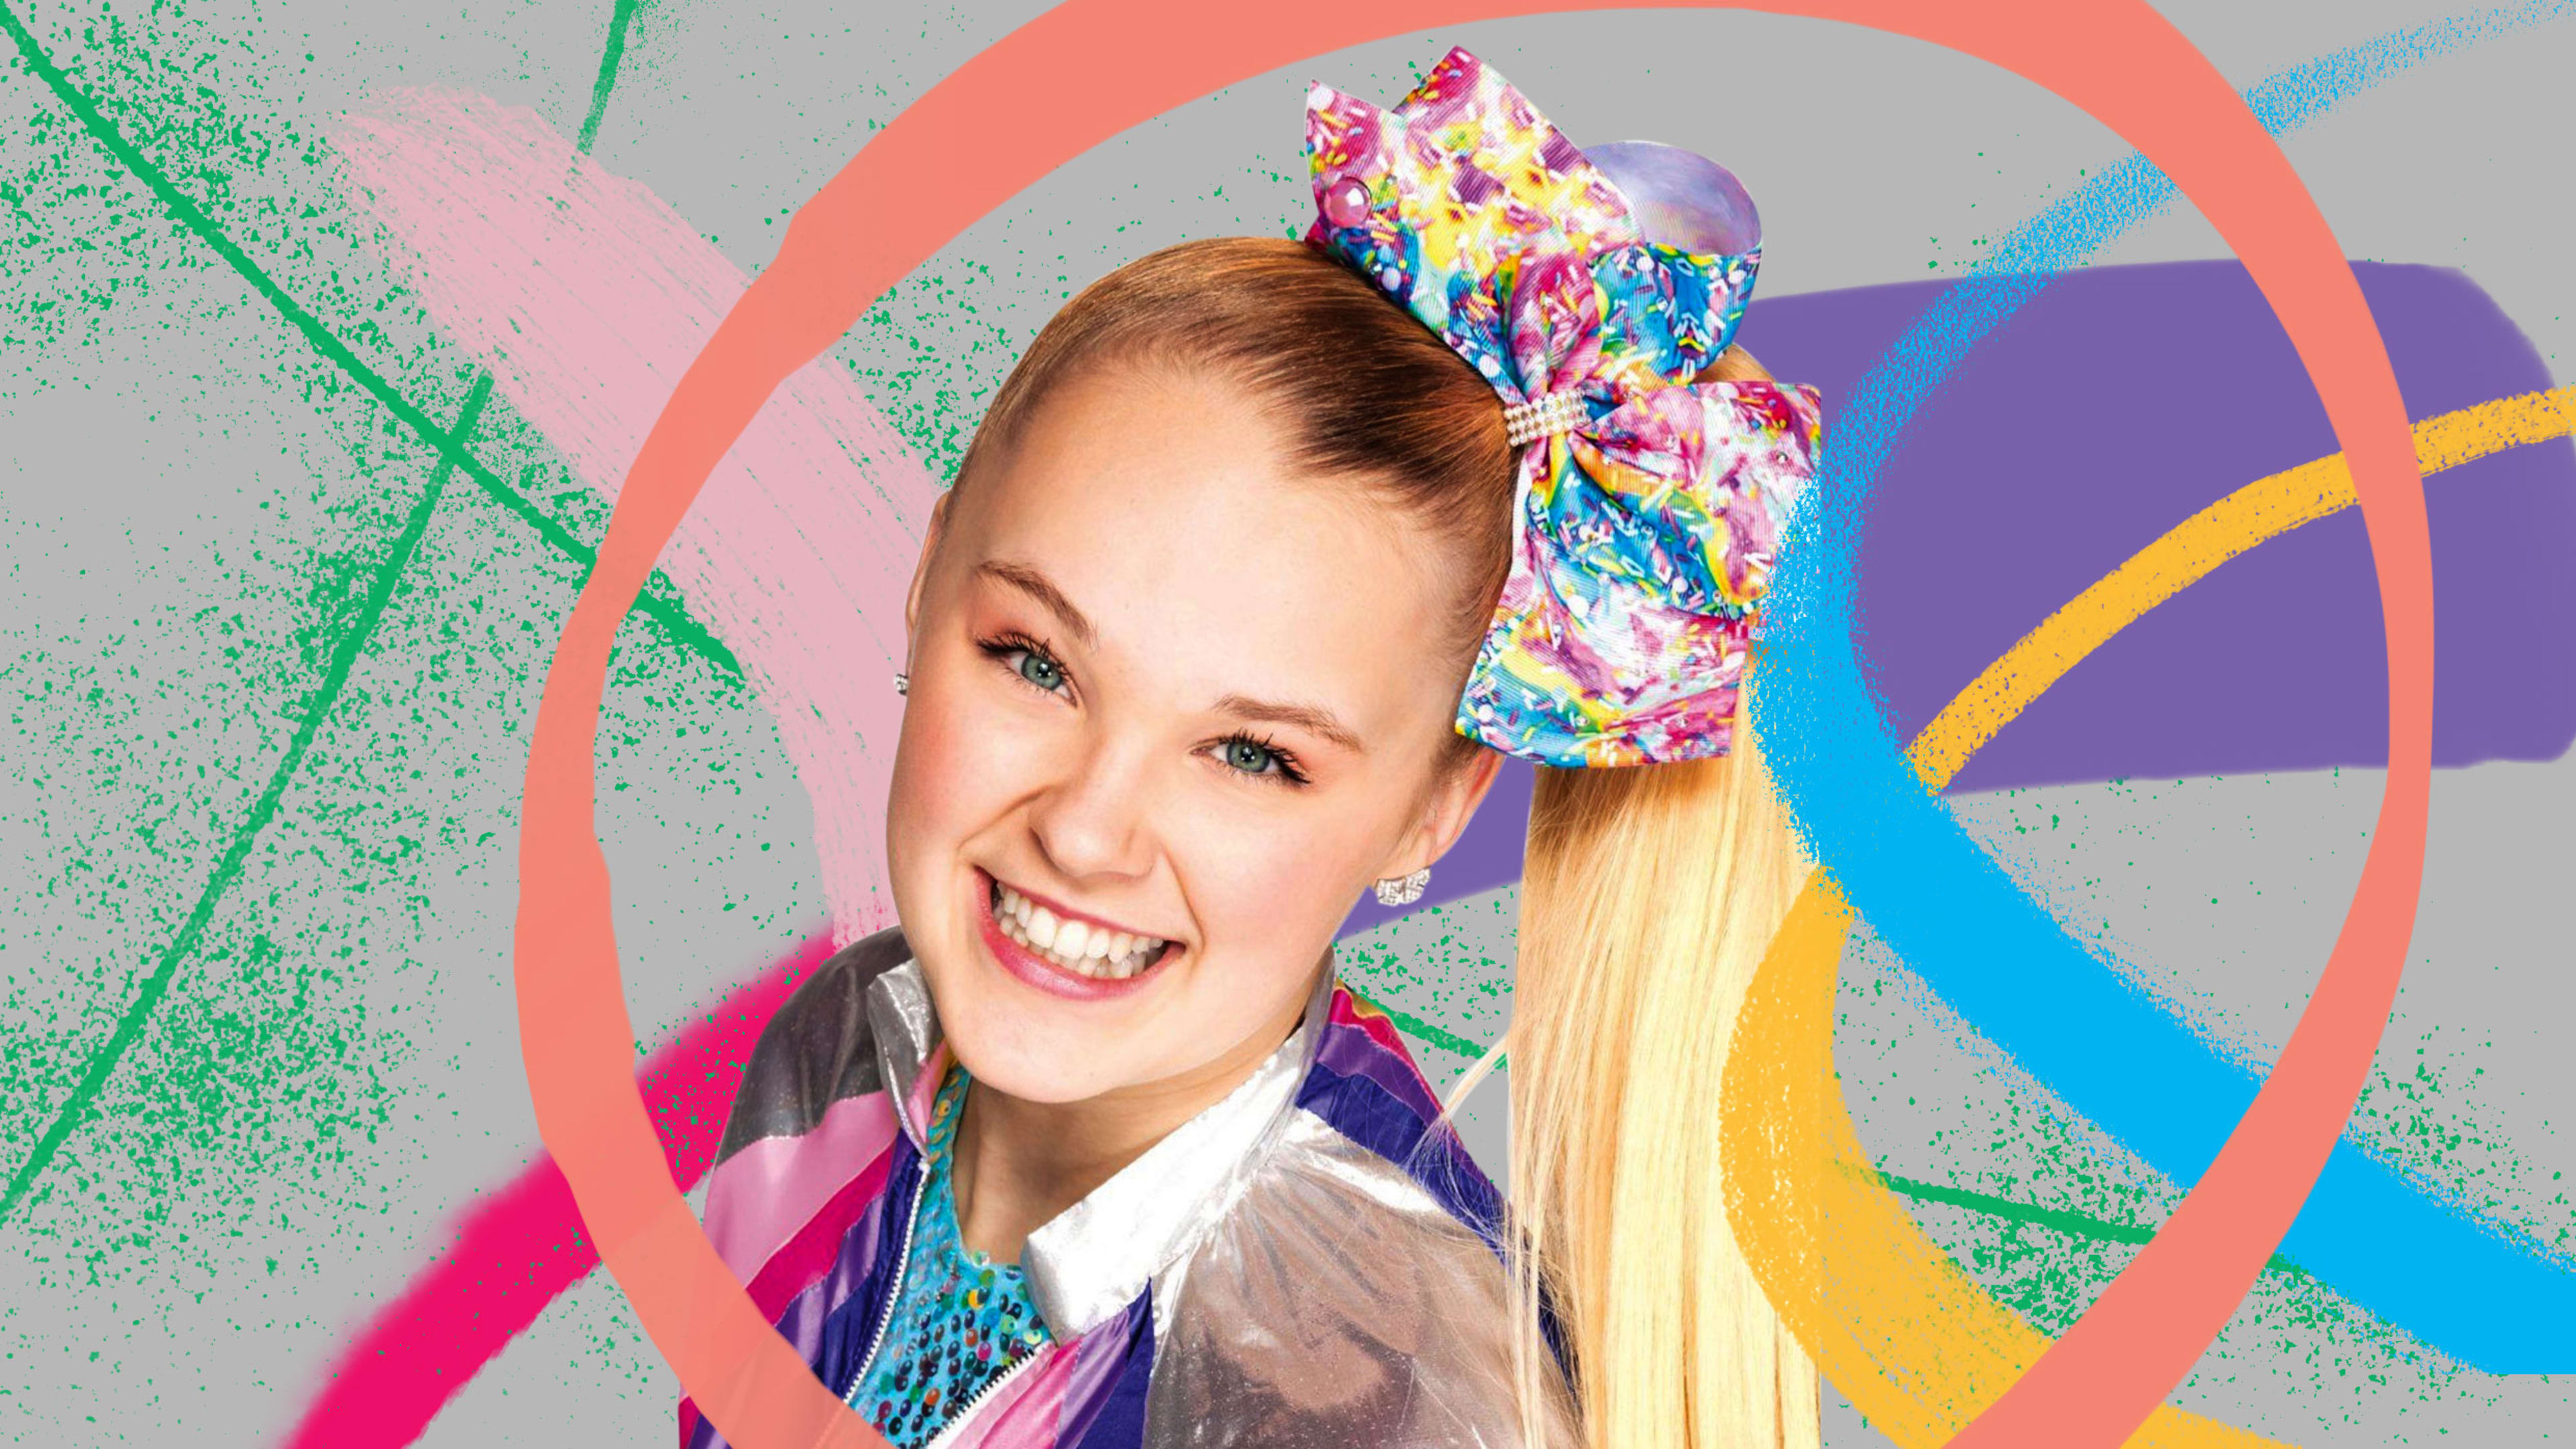 Why JoJo Siwa’s coming out matters